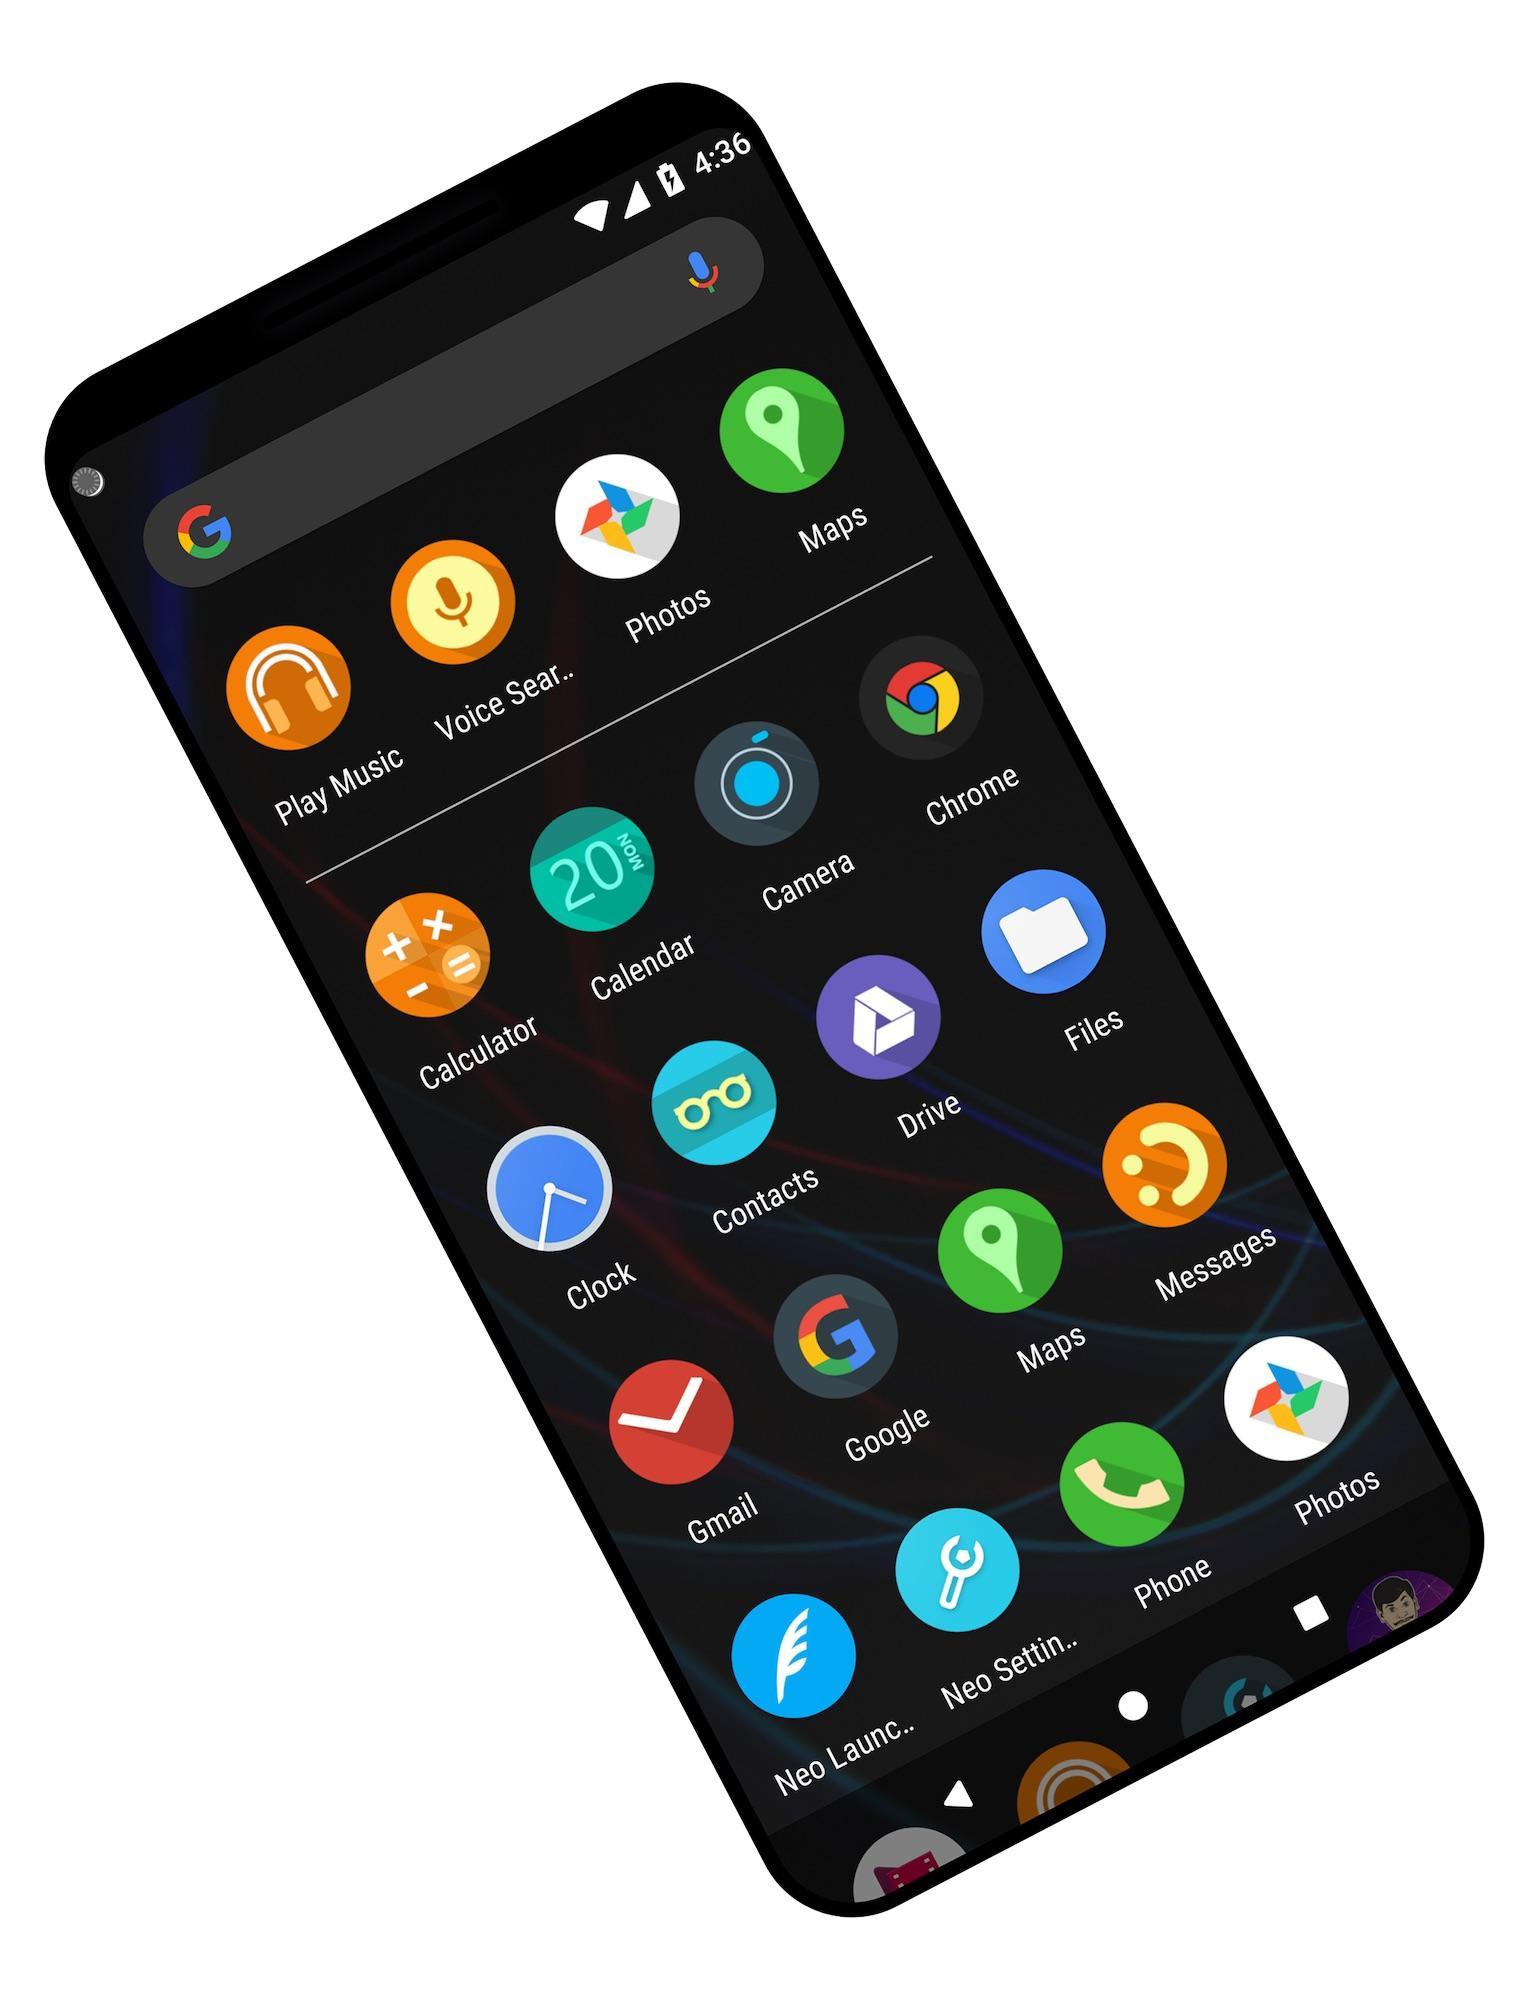 Launcher for Android ™ v1.4.3 Screenshot 2